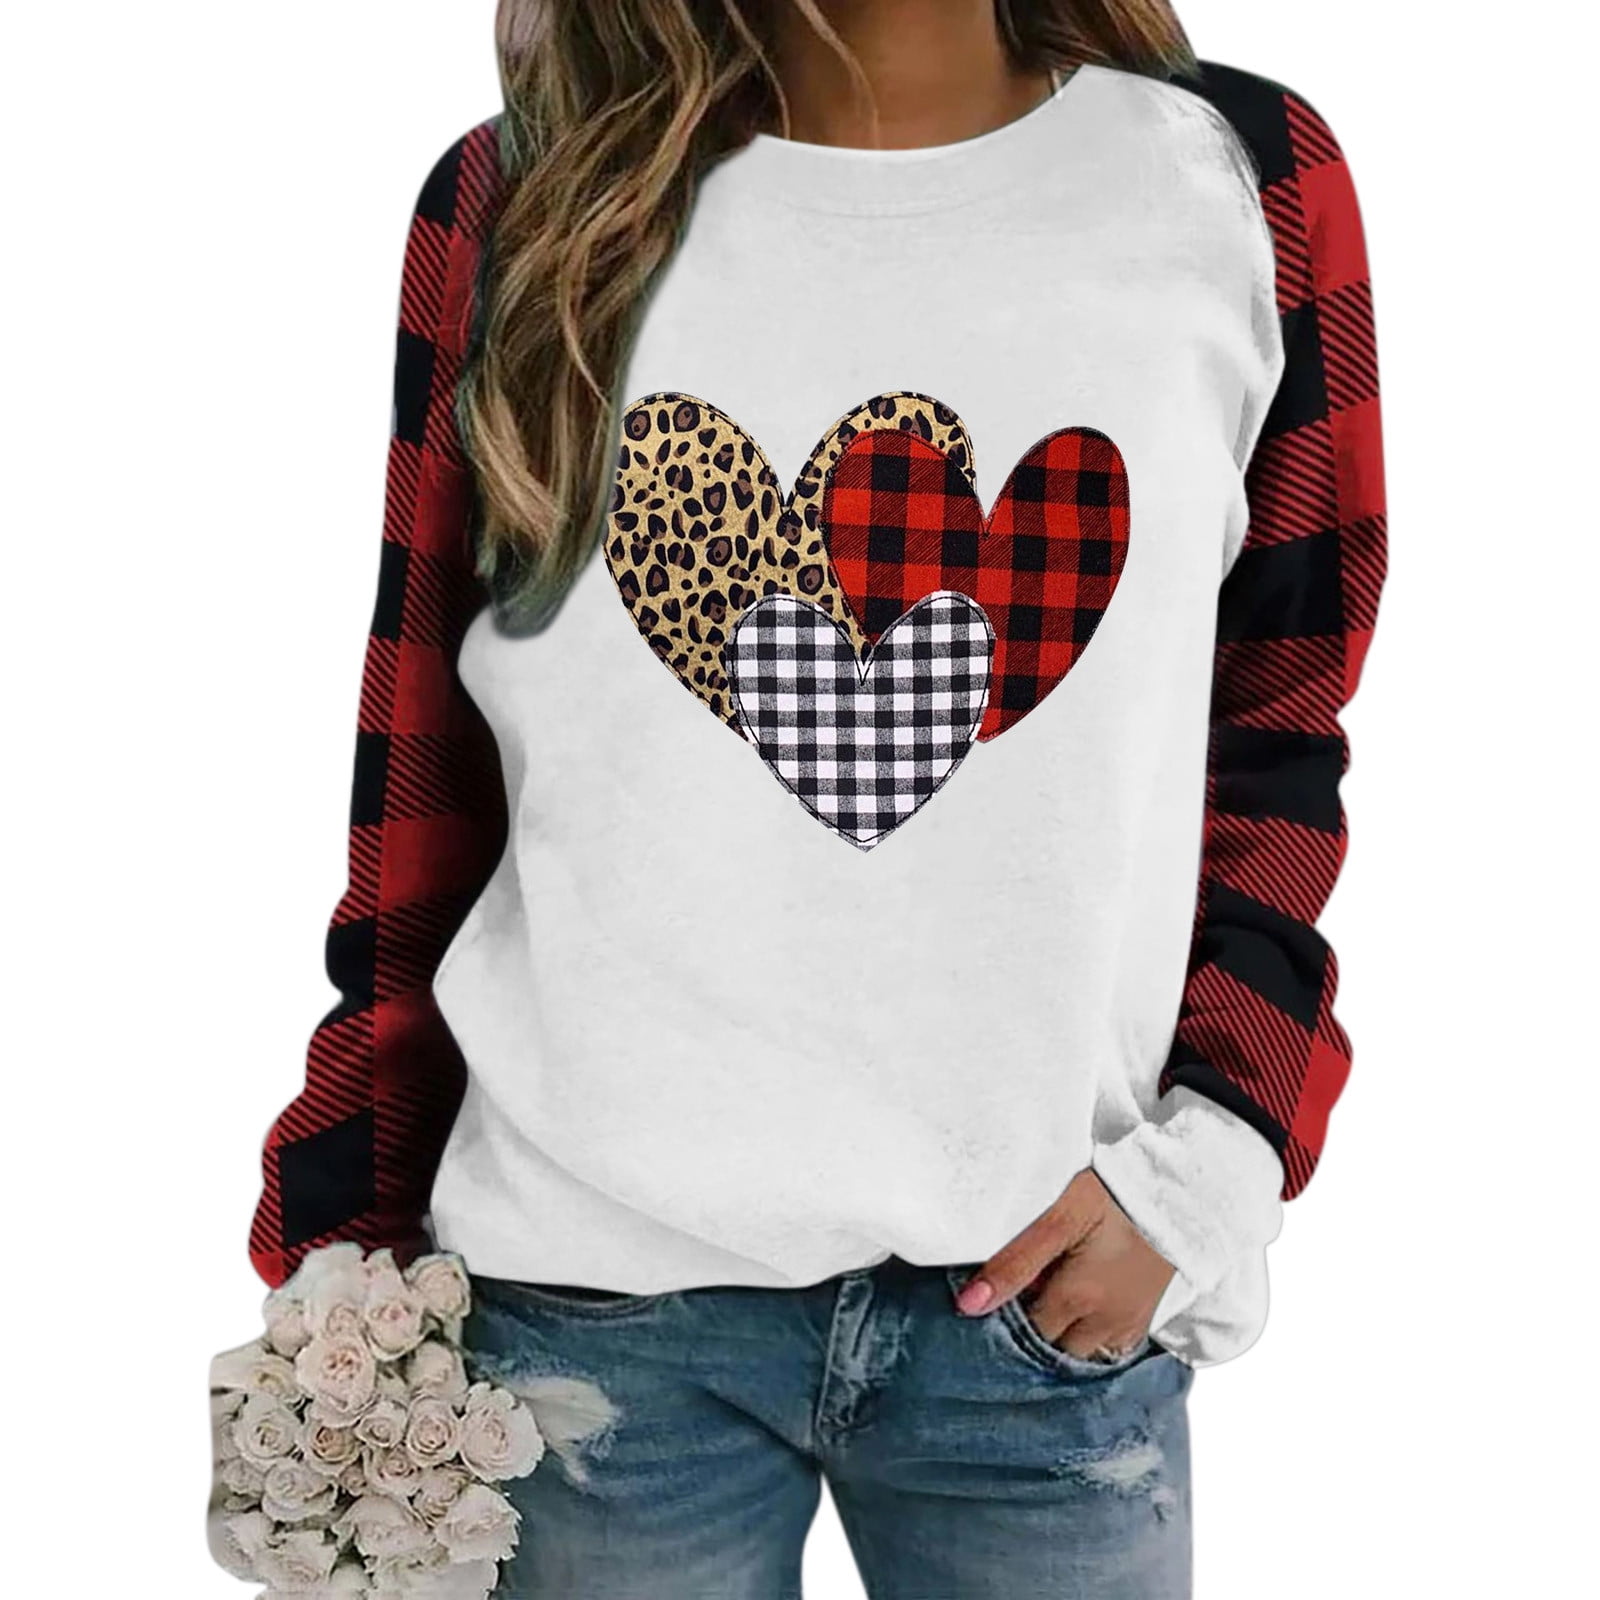 Women Valentines Day Pullover Valentine's Day Plaid Long-Sleeved Sweatshirt Casual Tops Blouse Outwear Sweater